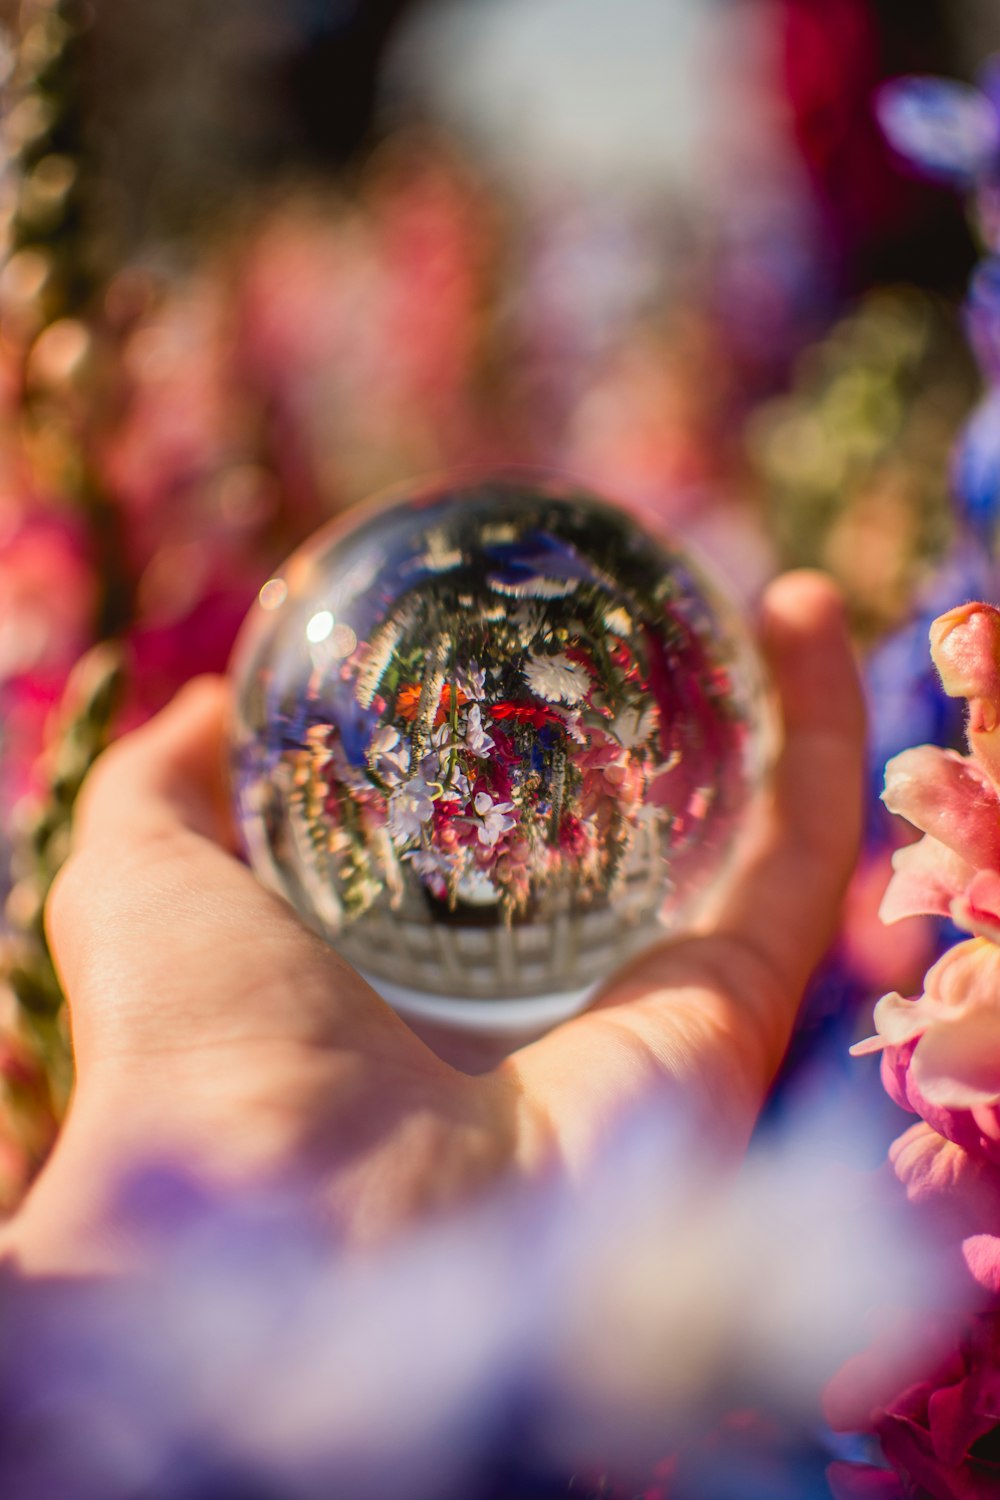 assorted flowers reflecting on clear glass globe on hand